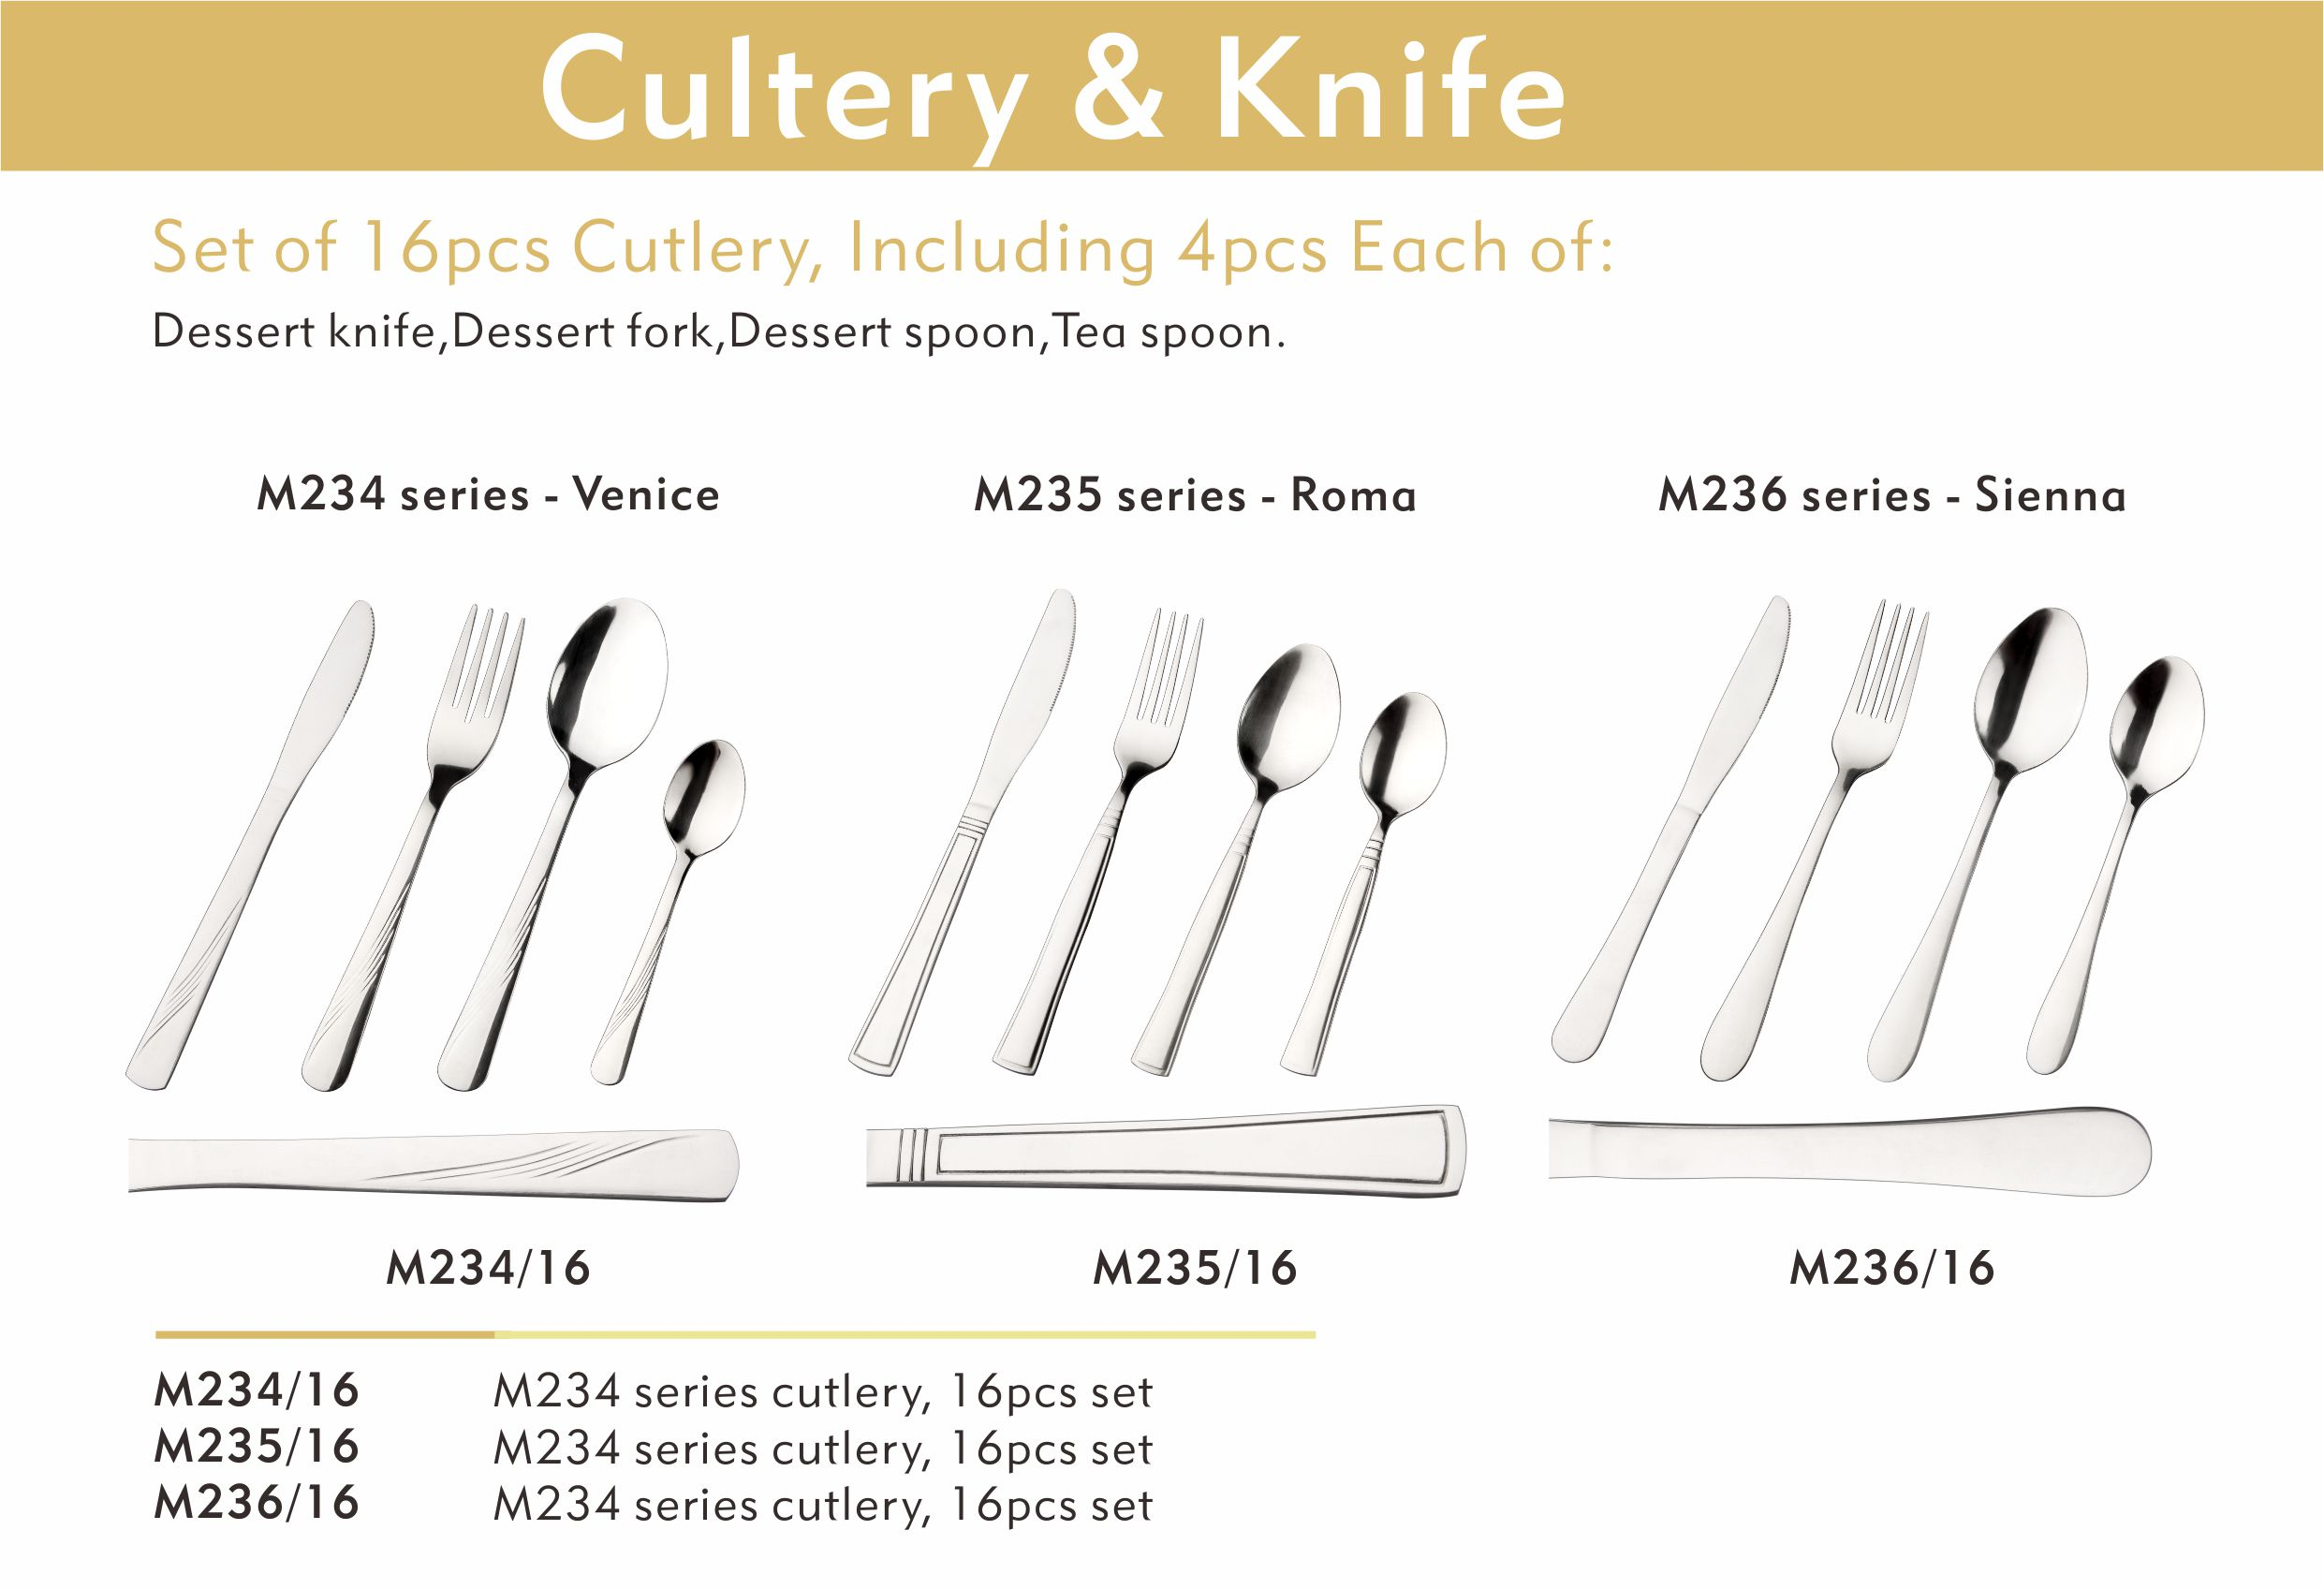 Usage of knife, fork and spoon